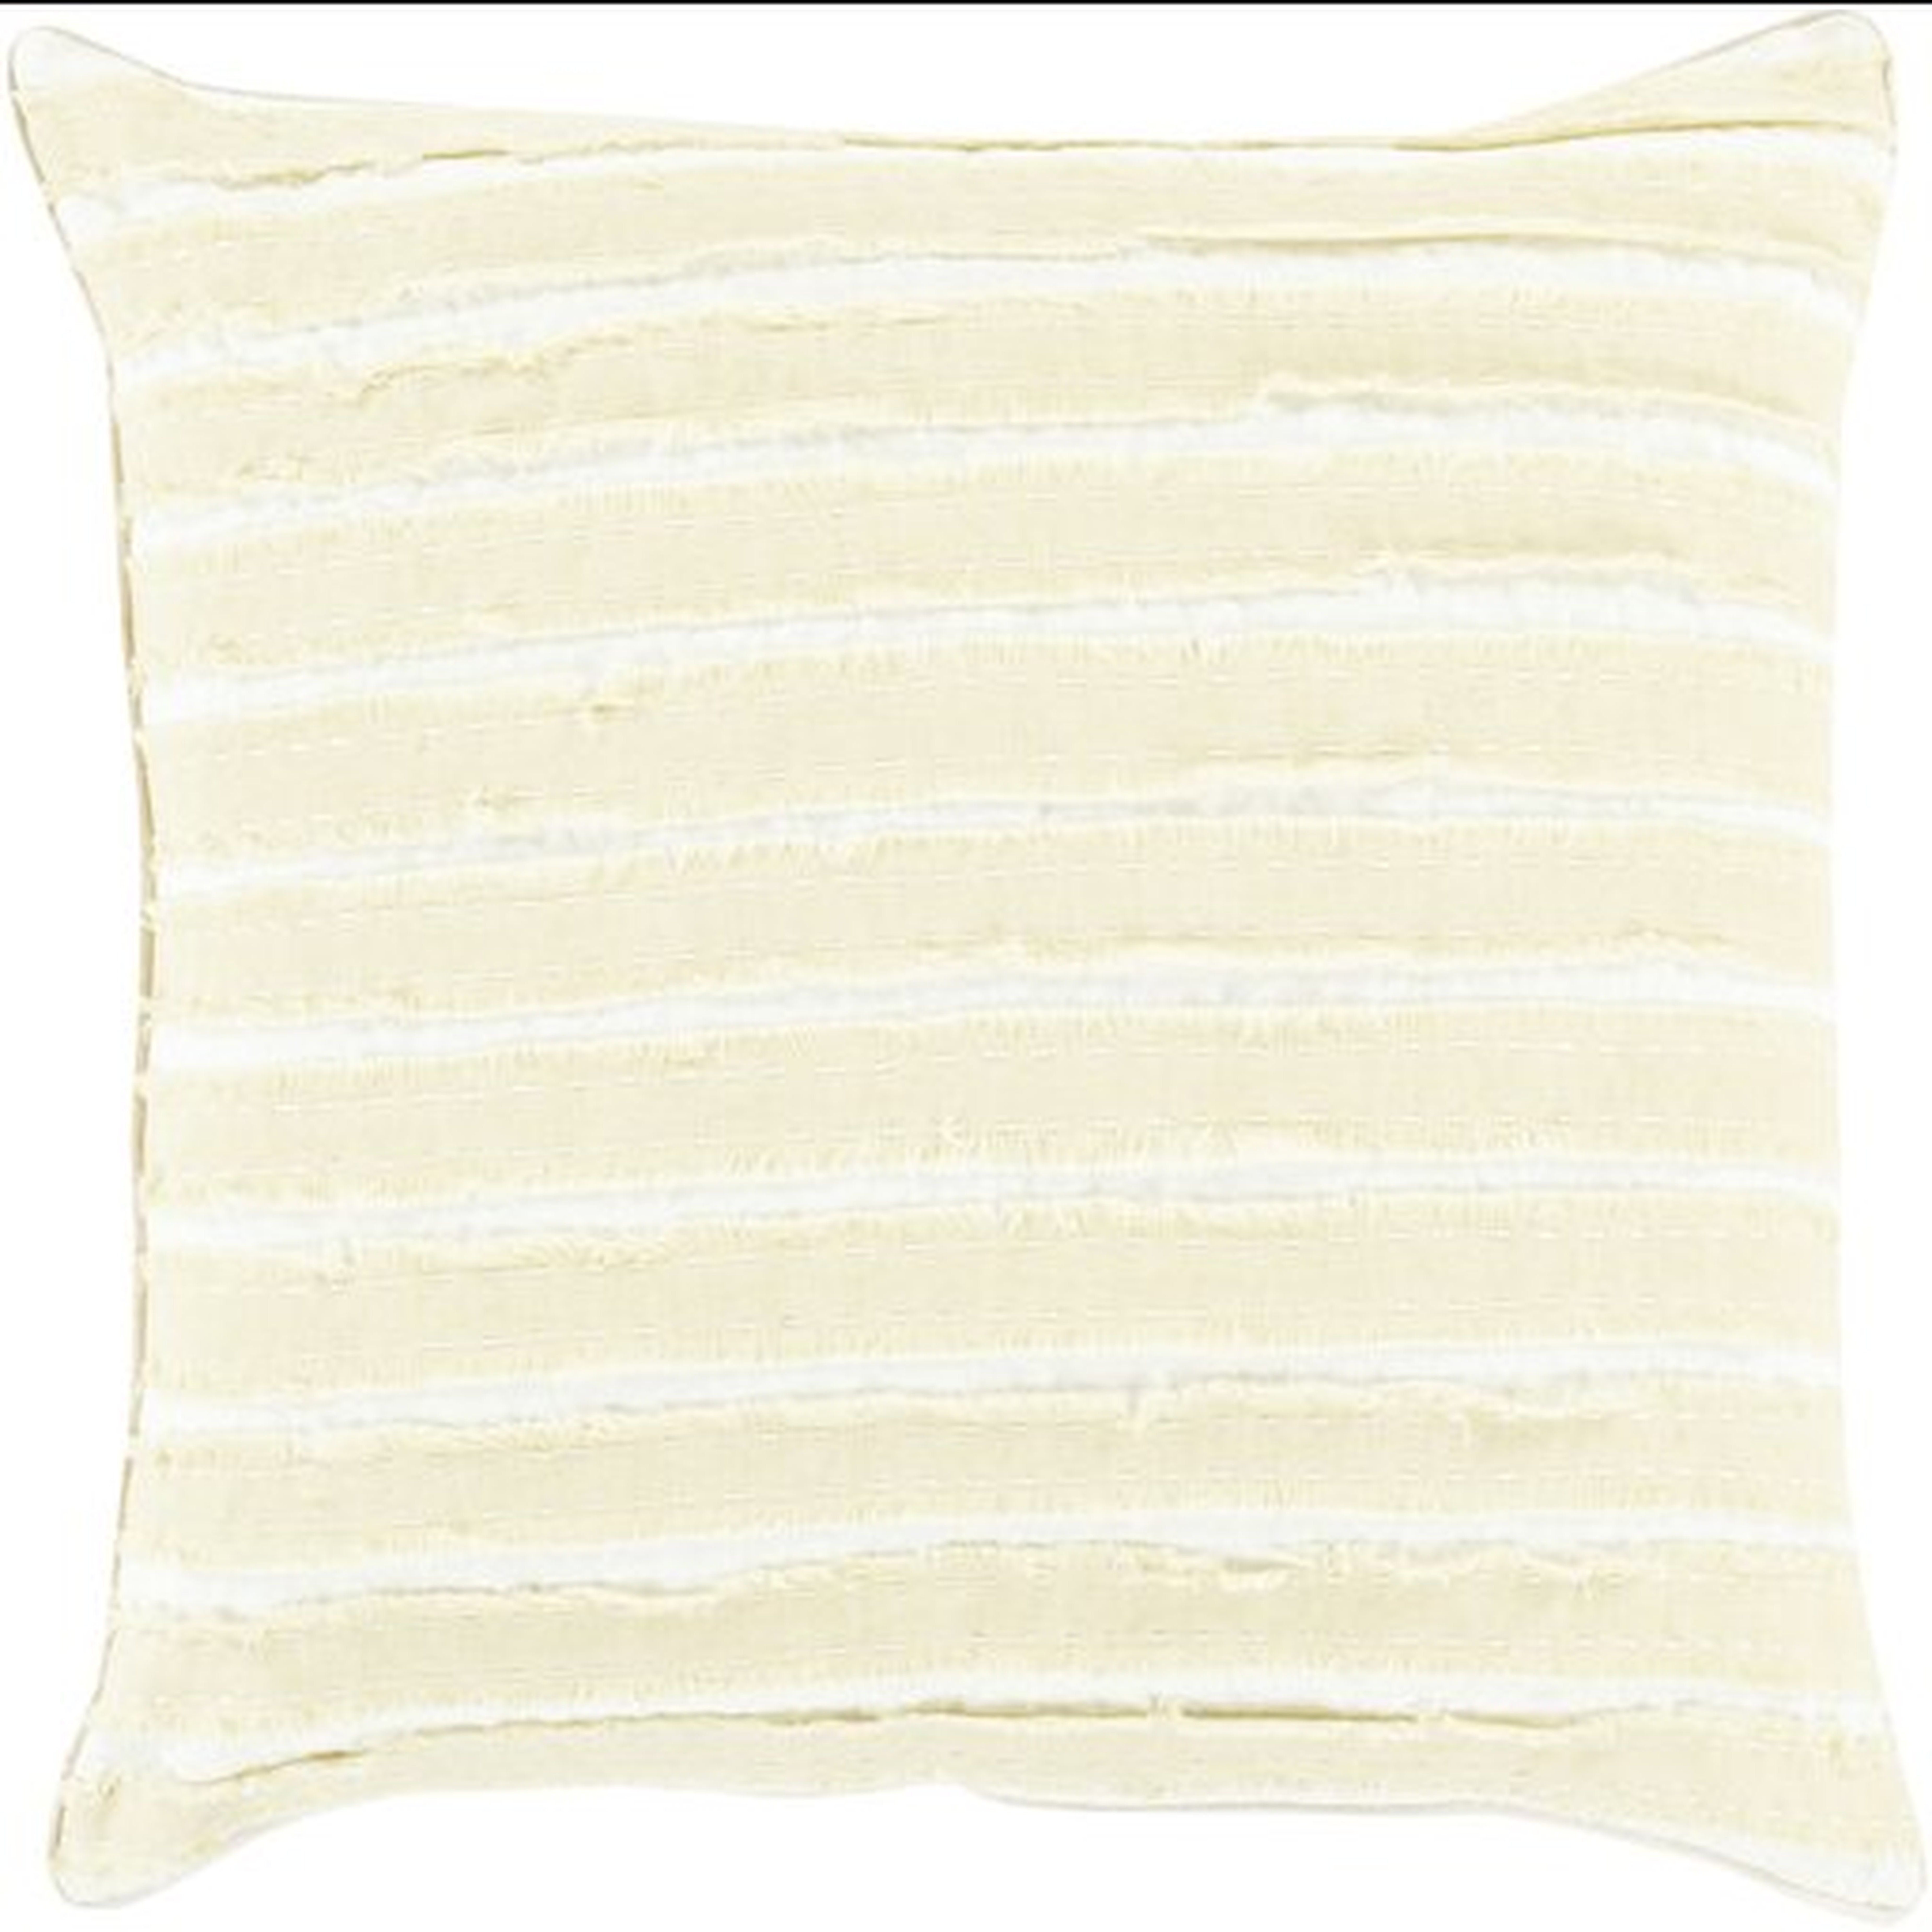 Willow Throw Pillow, 18" x 18", with down insert - Surya